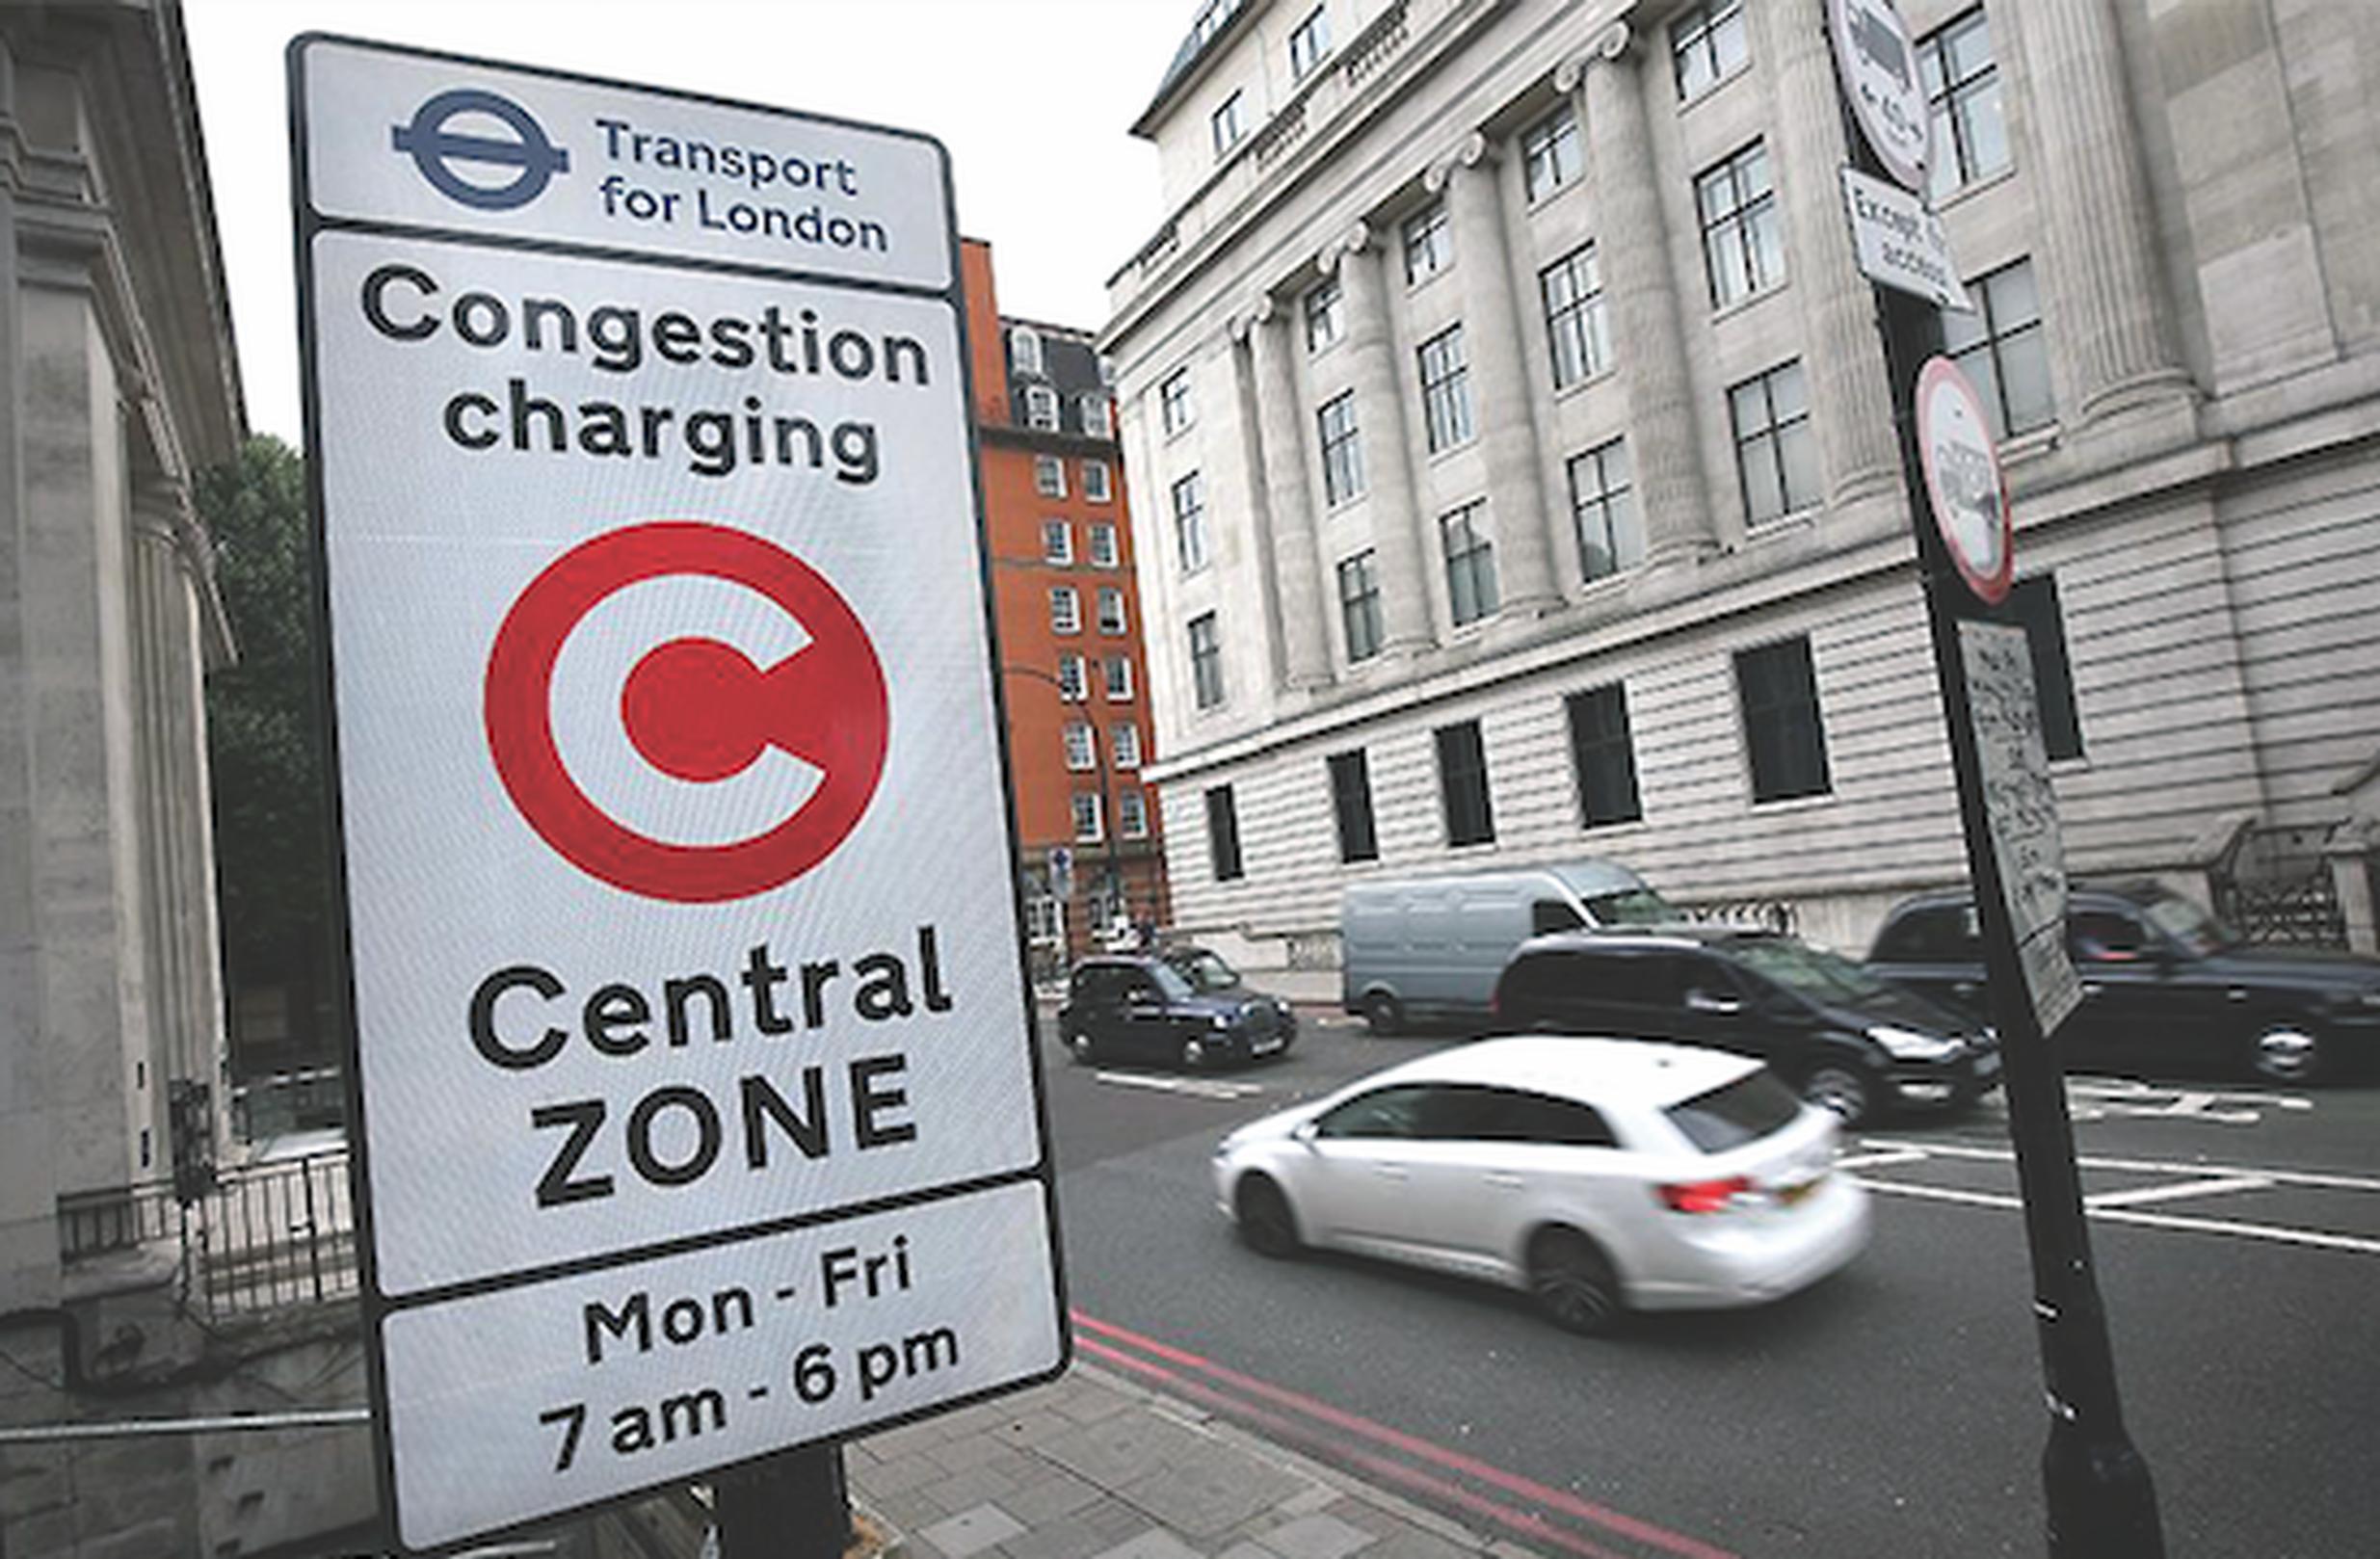 Road user charges in London will be suspended until further notice